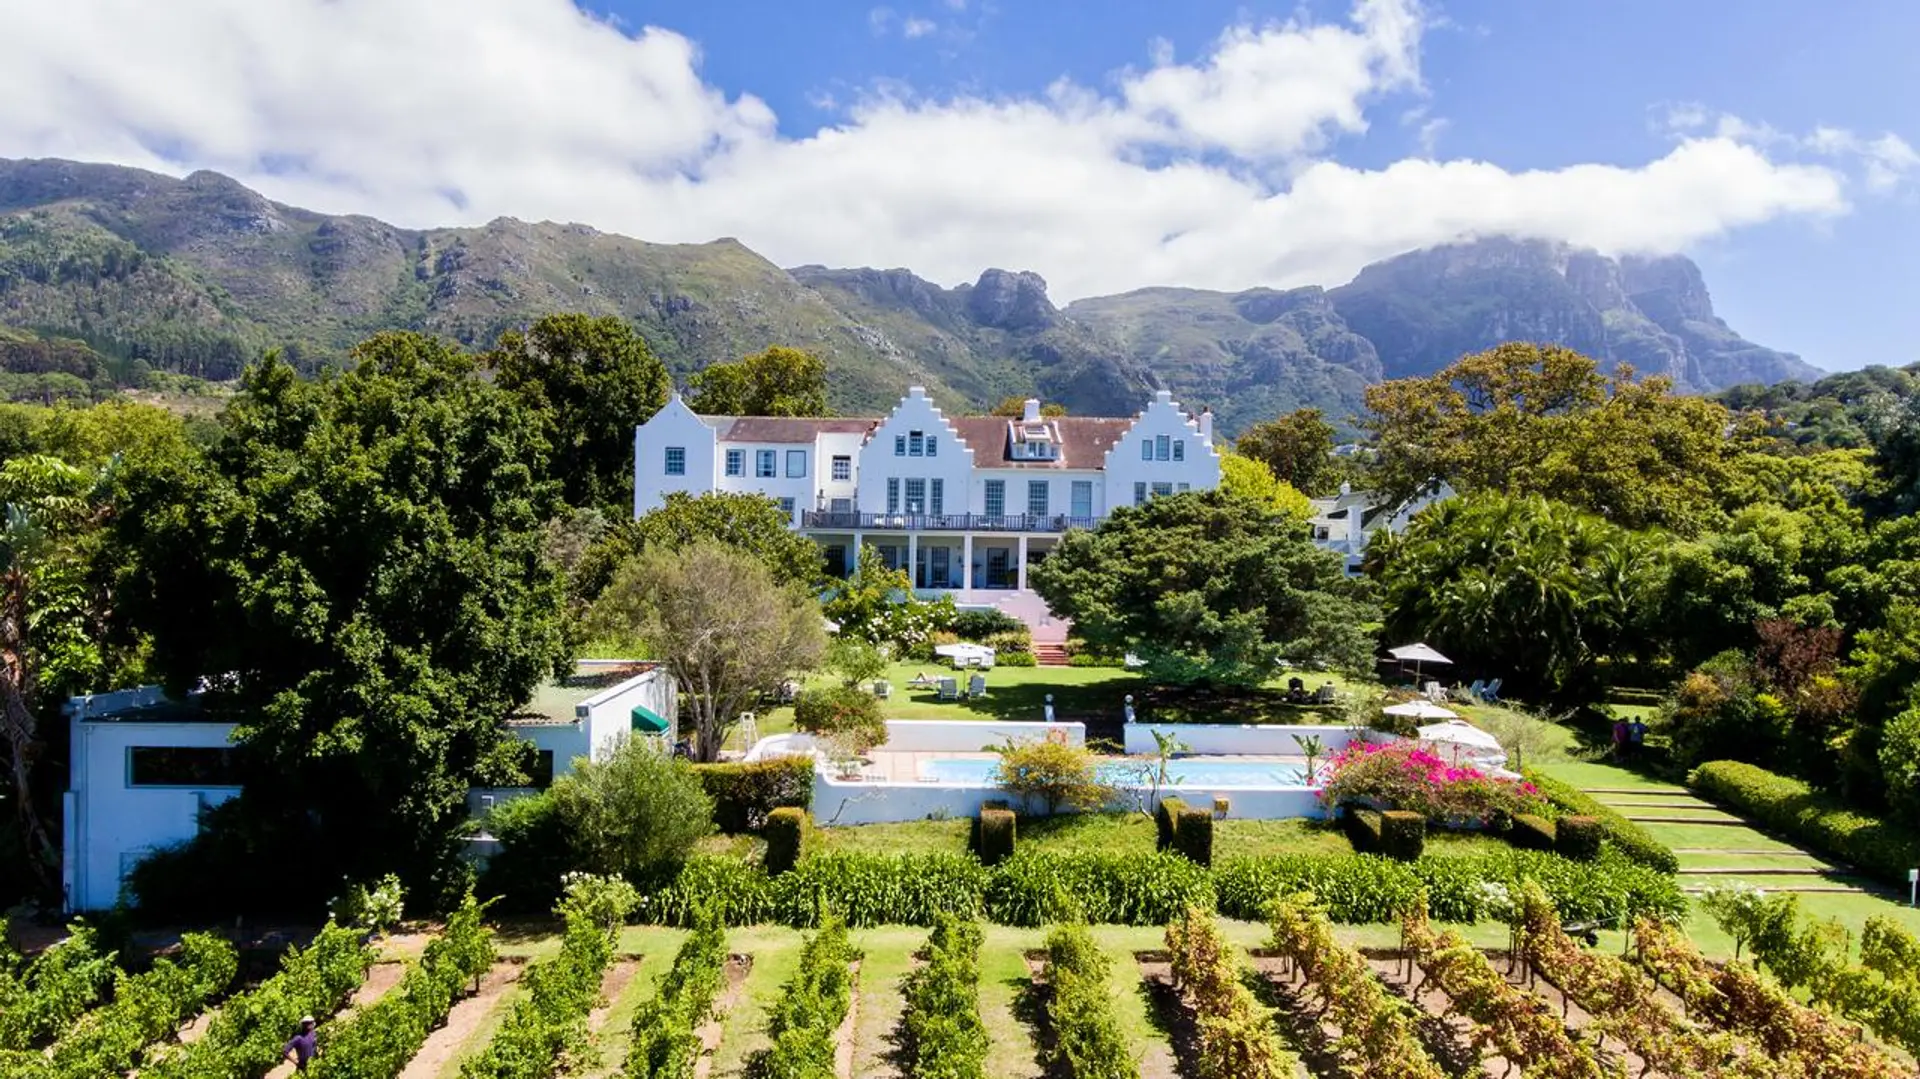 Hotels Toplists - The Best Luxury Hotels In Cape Town